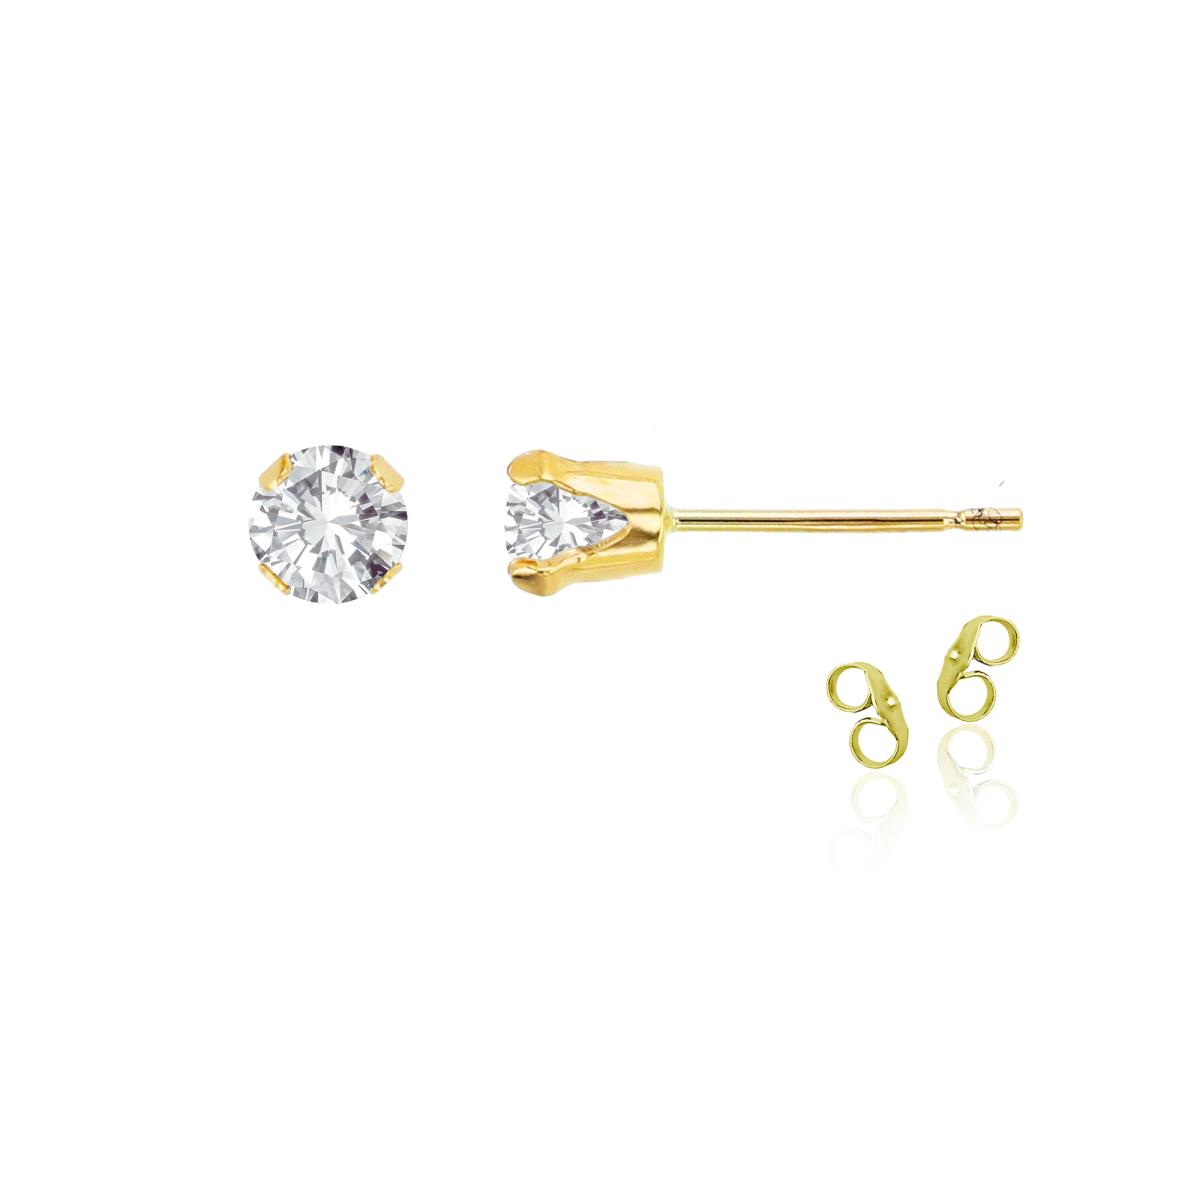 Sterling Silver Yellow 4mm Round White Topaz Stud Earring with Clutch